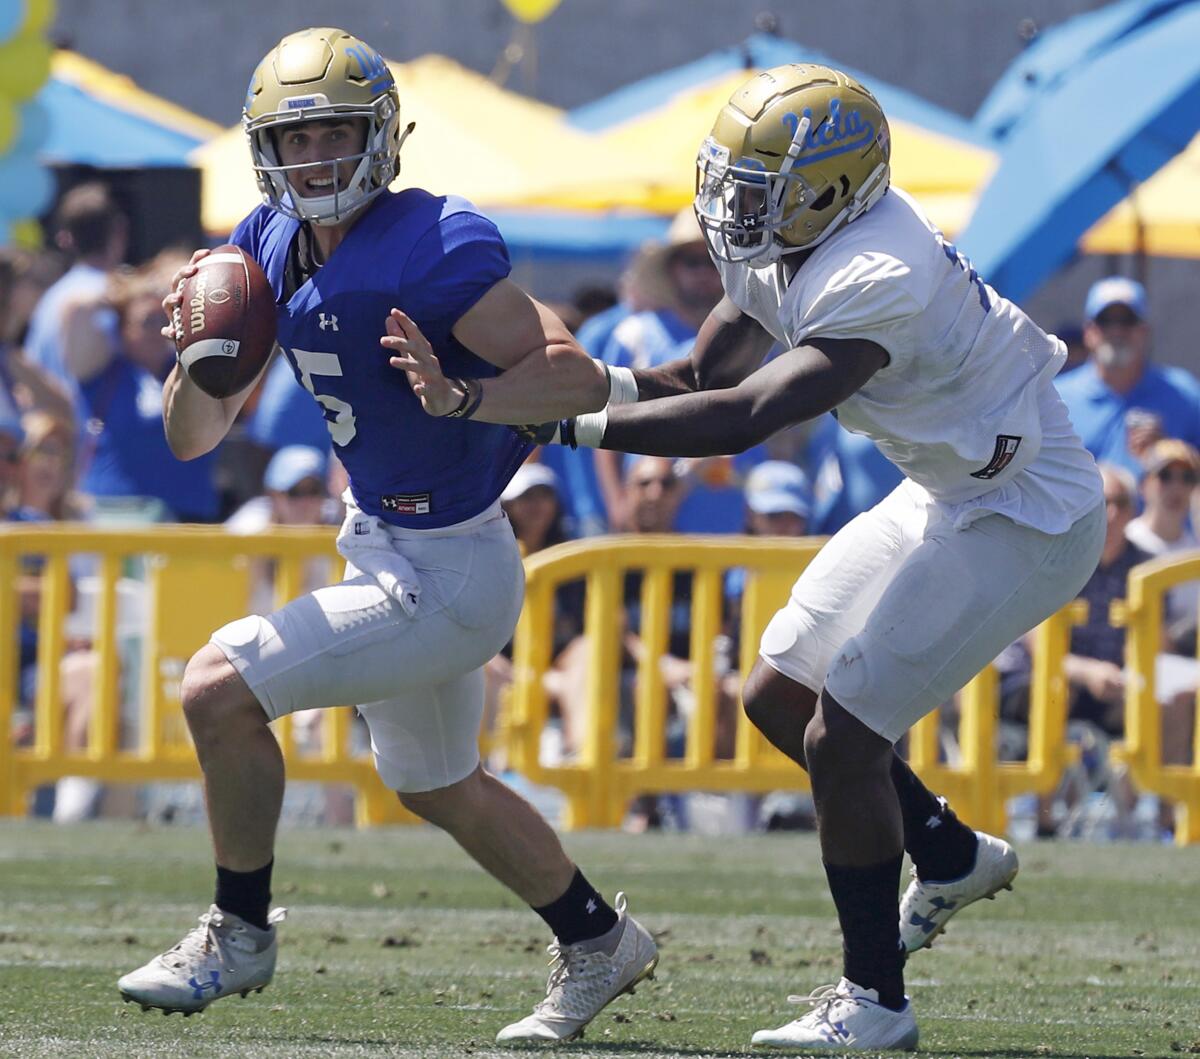 UCLA's Matt Lynch is one of many players who entered the transfer portal this offseason.